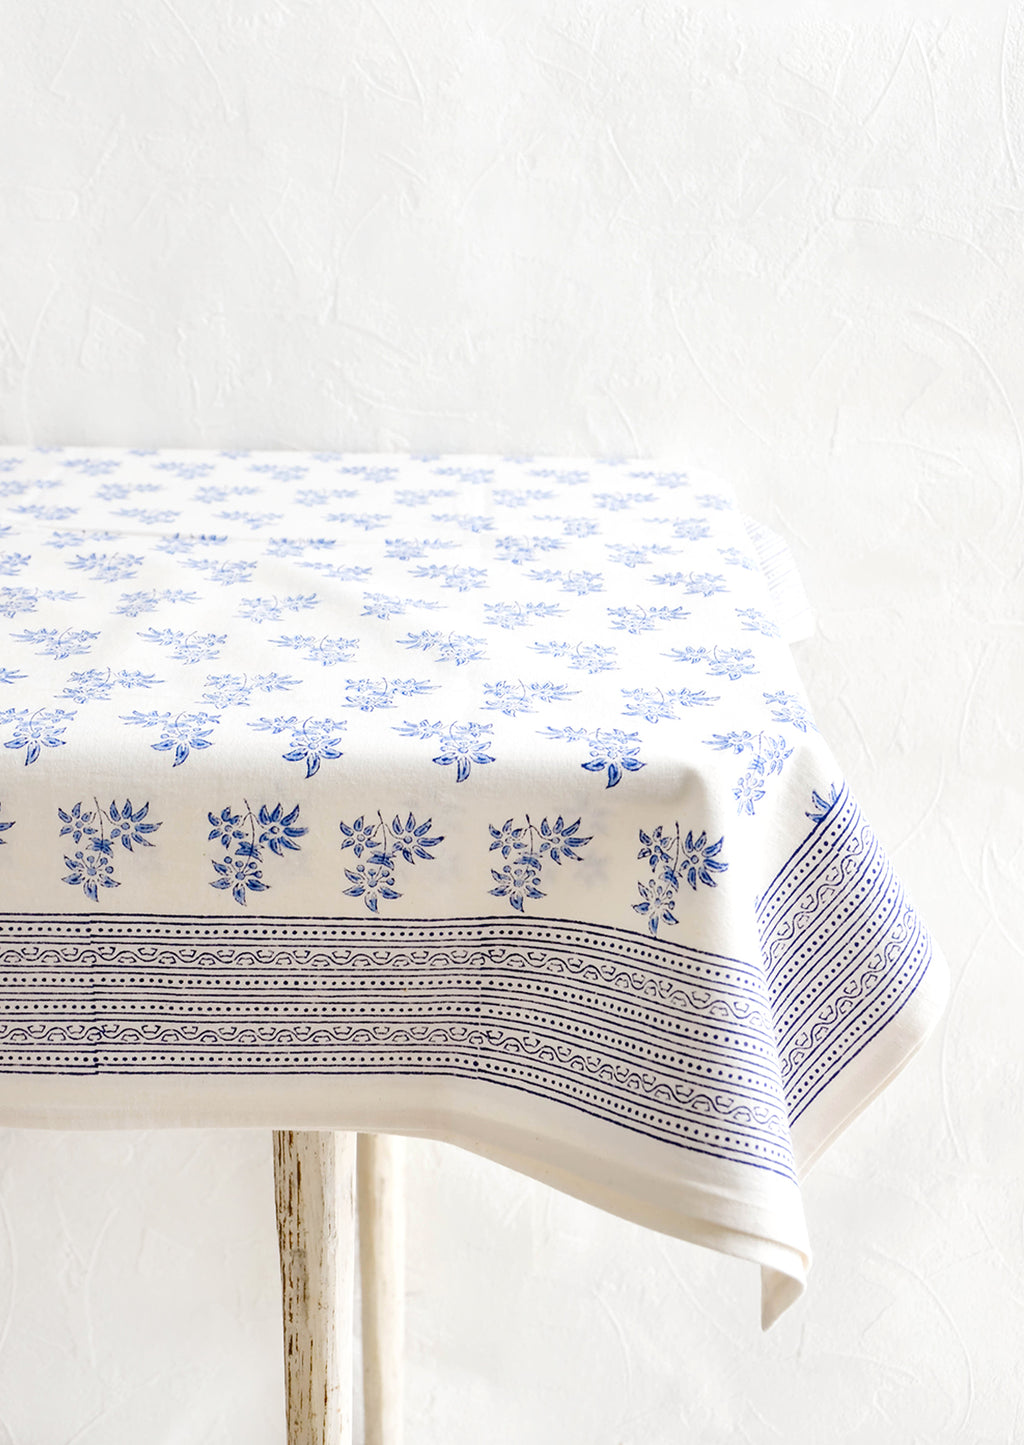 2: White cotton tablecloth with blue floral print and patterned border